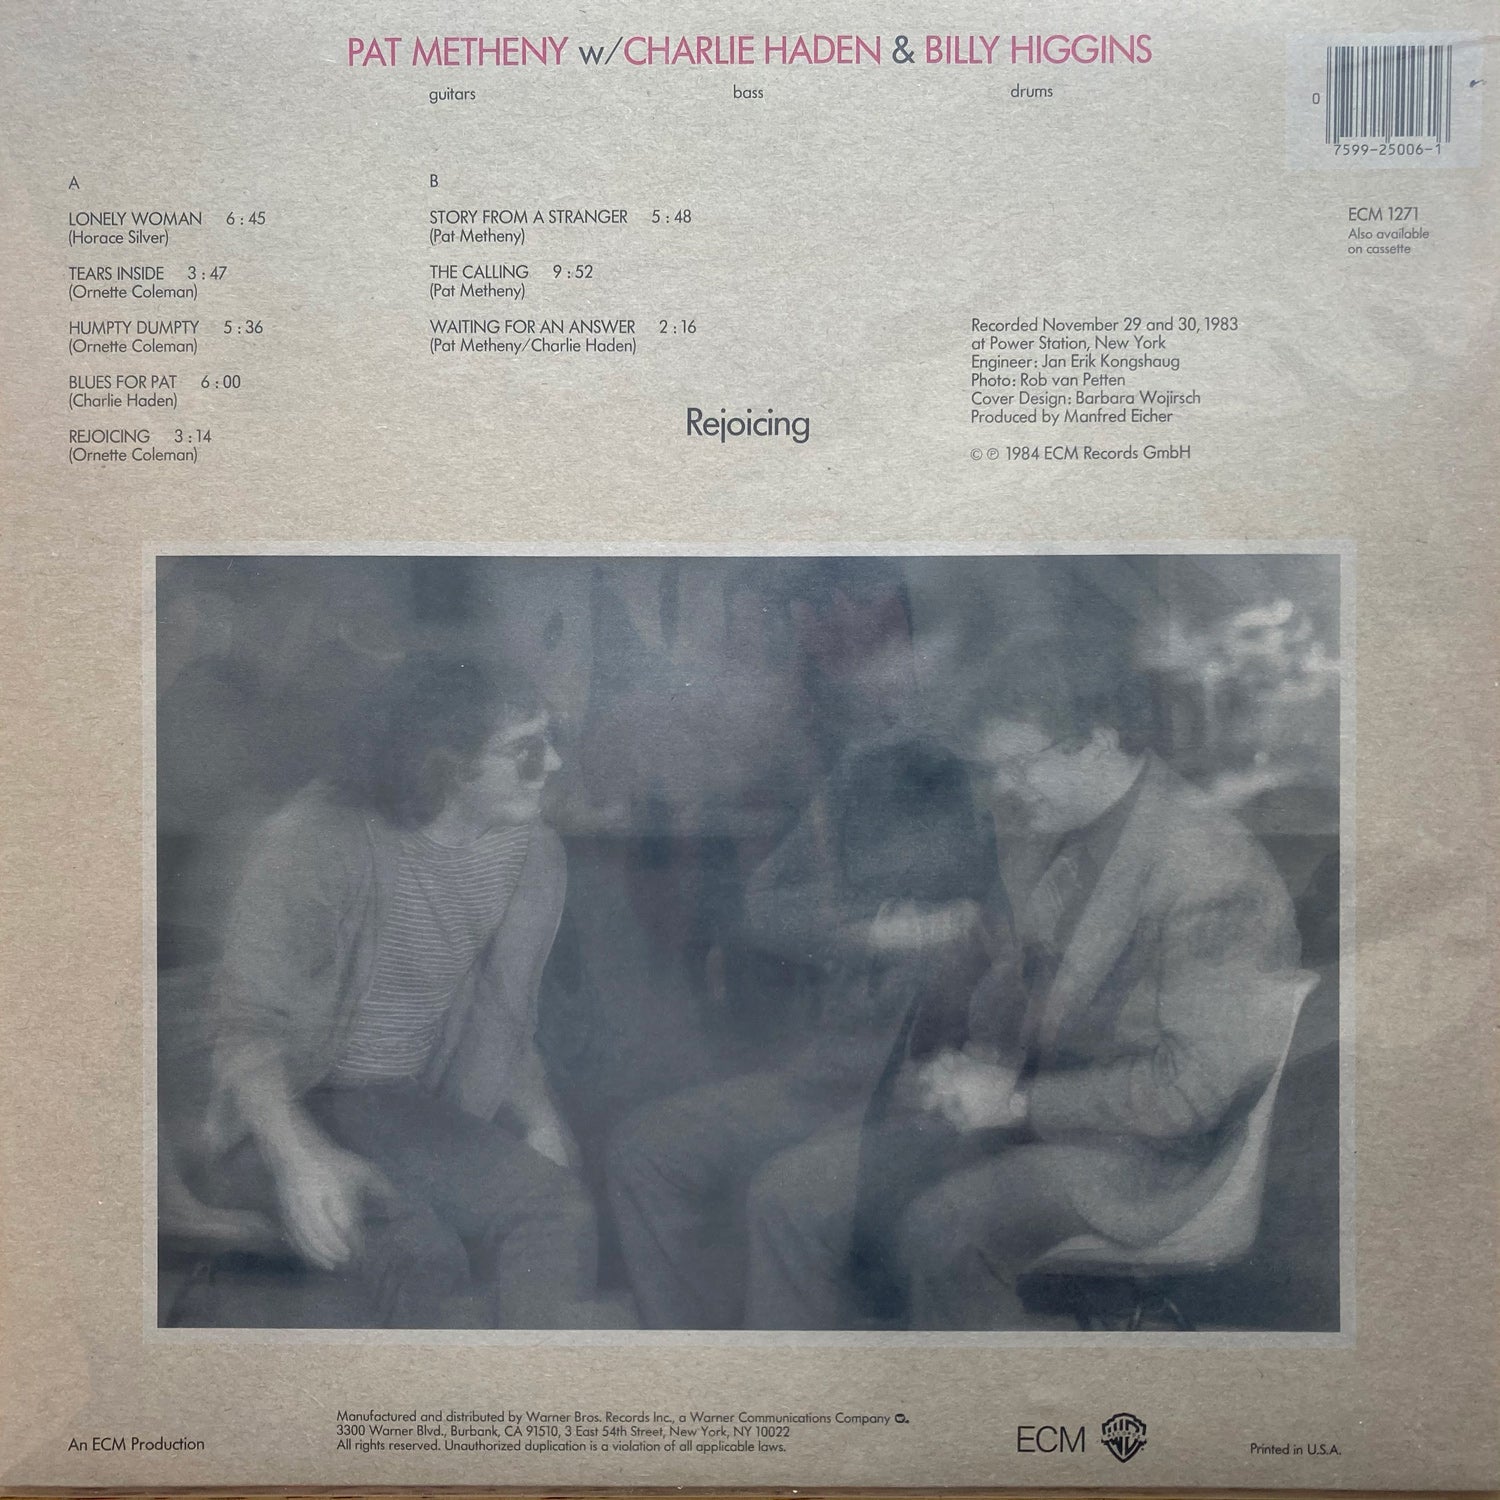 Pat Metheny with Charlie Haden and Billy Higgins - Rejoicing